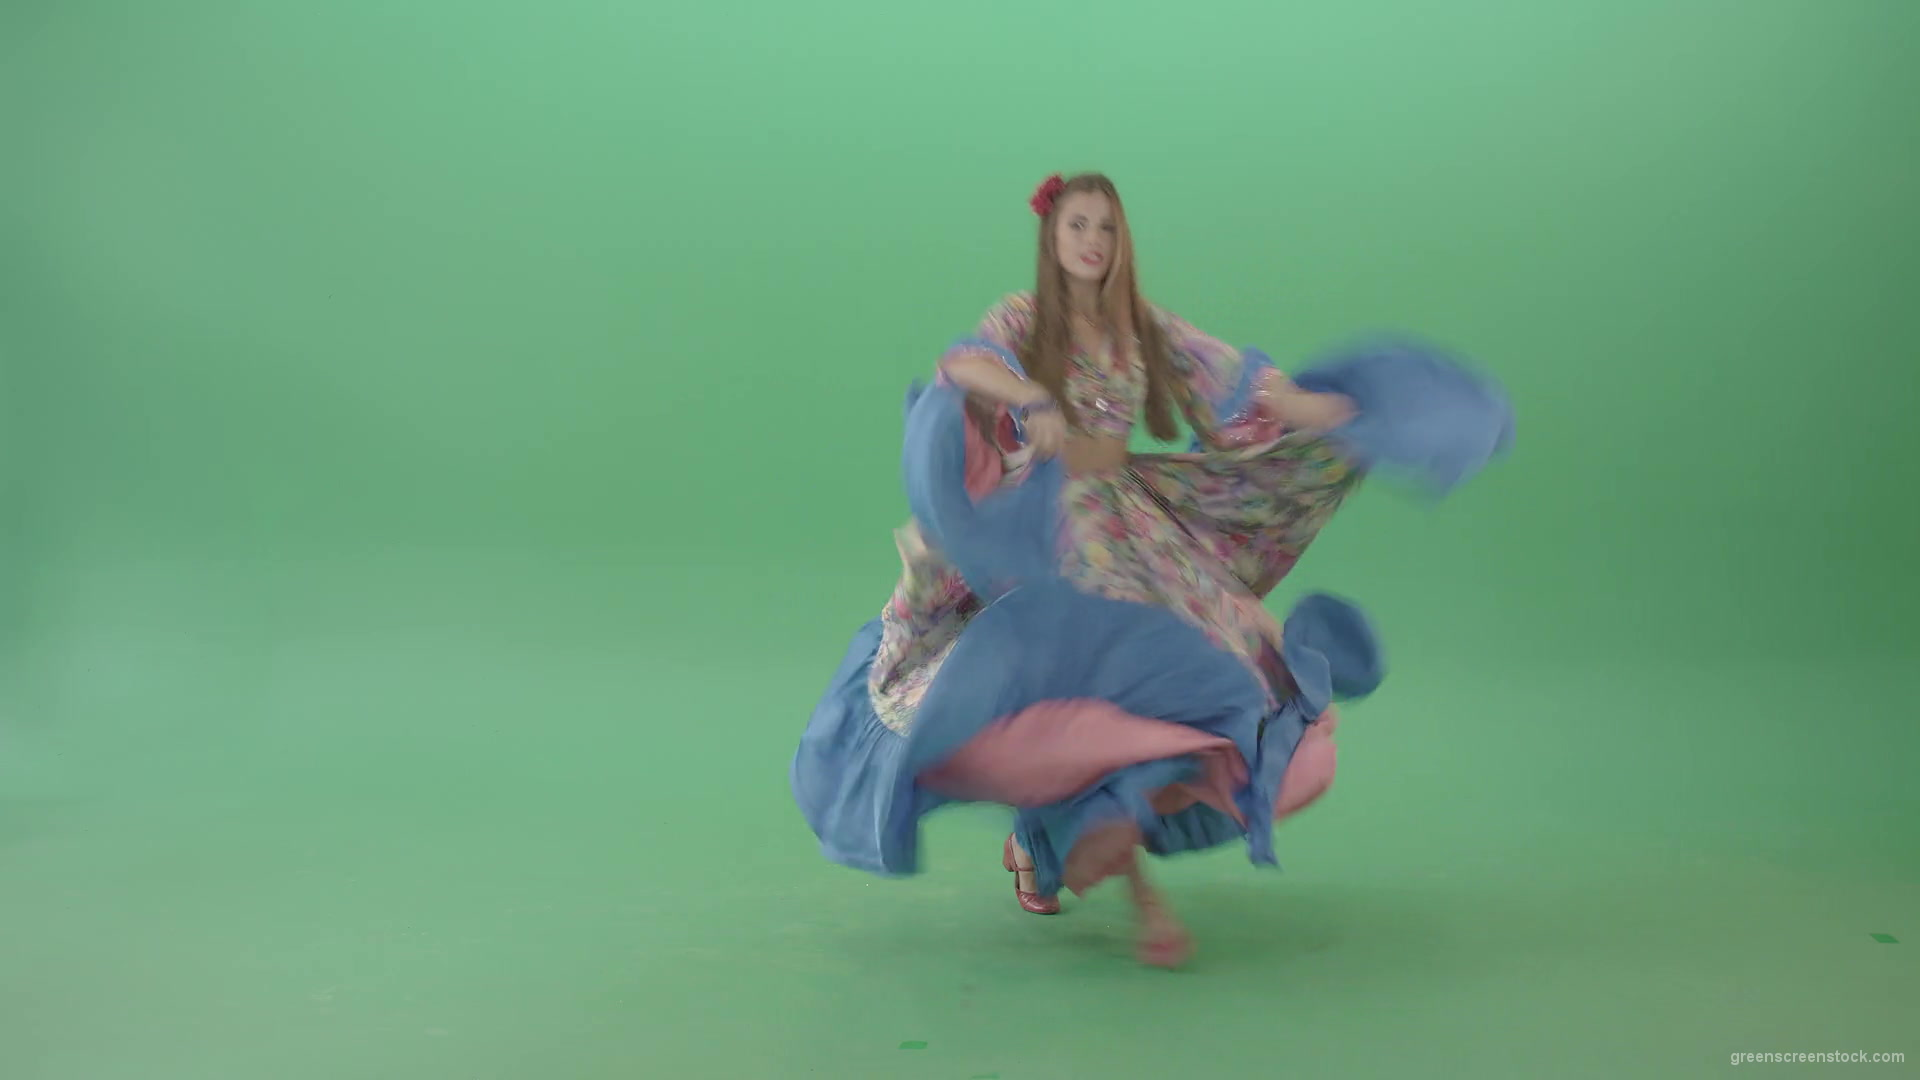 Balkan-roma-girl-waving-gypsy-dress-and-dancing-isolated-on-green-screen-4K-Video-Footage-1-1920_008 Green Screen Stock